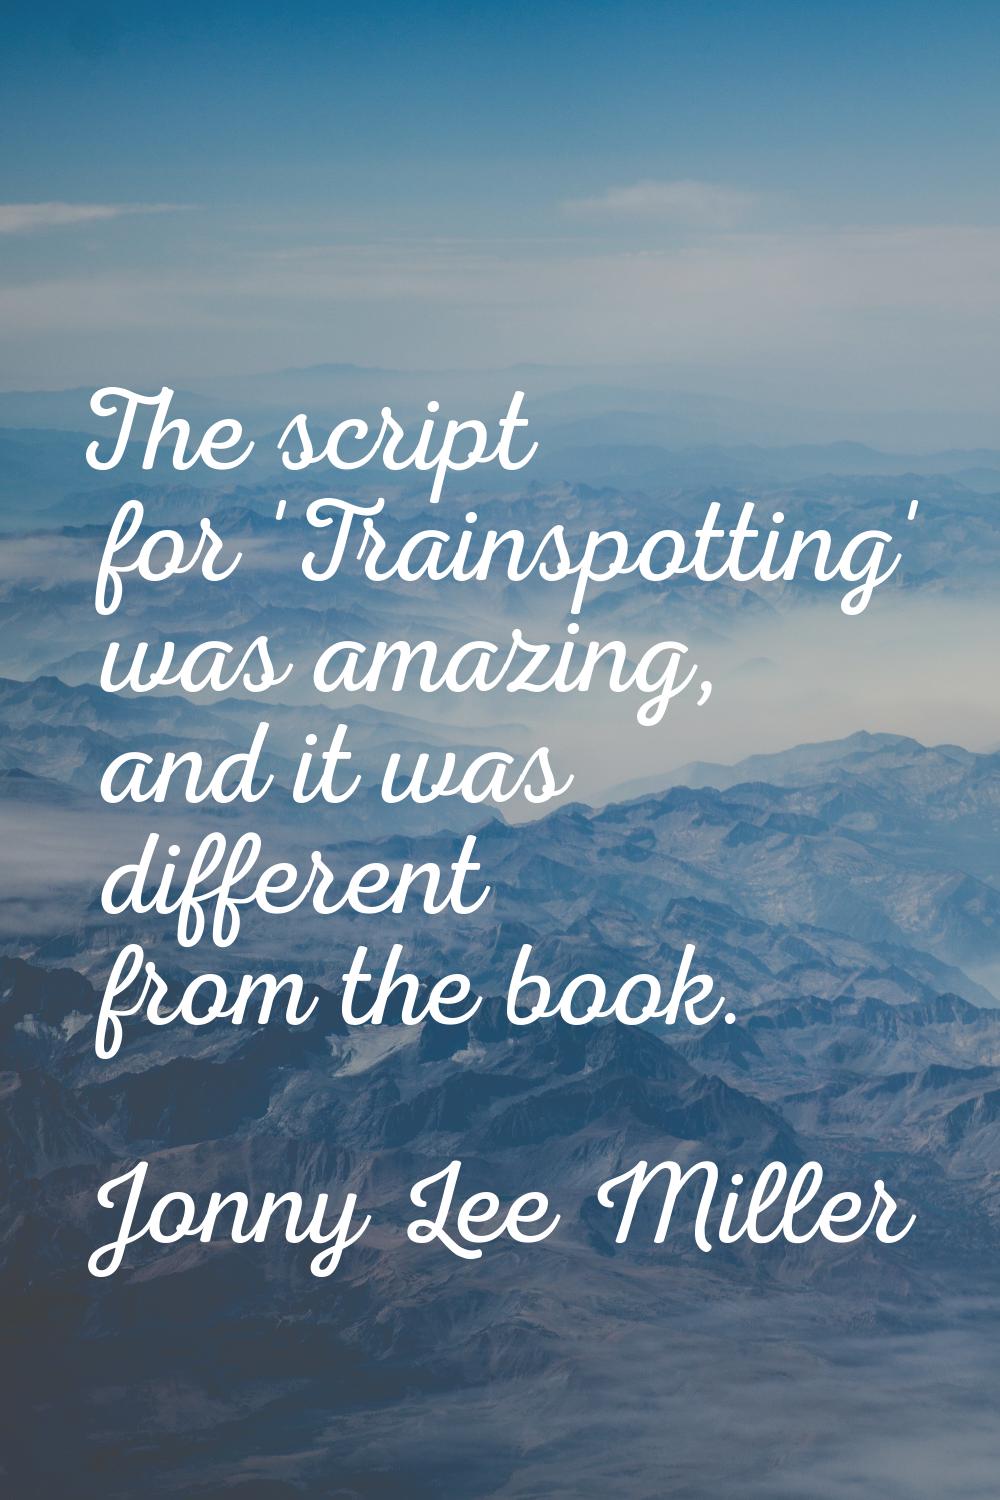 The script for 'Trainspotting' was amazing, and it was different from the book.